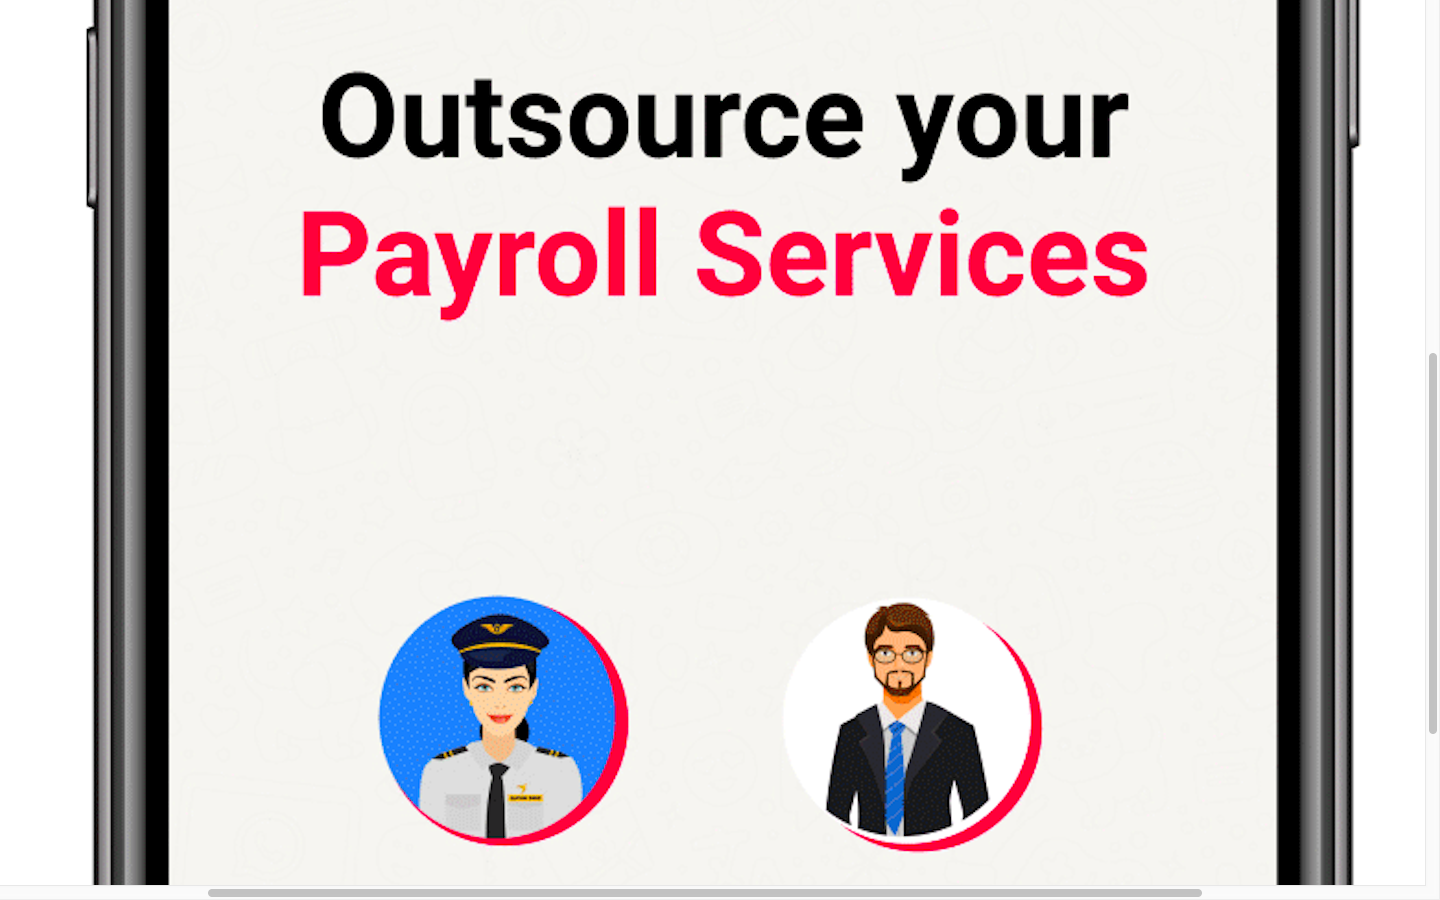 Outsource your Payroll Services to Minimizing the Complexity and Compliance